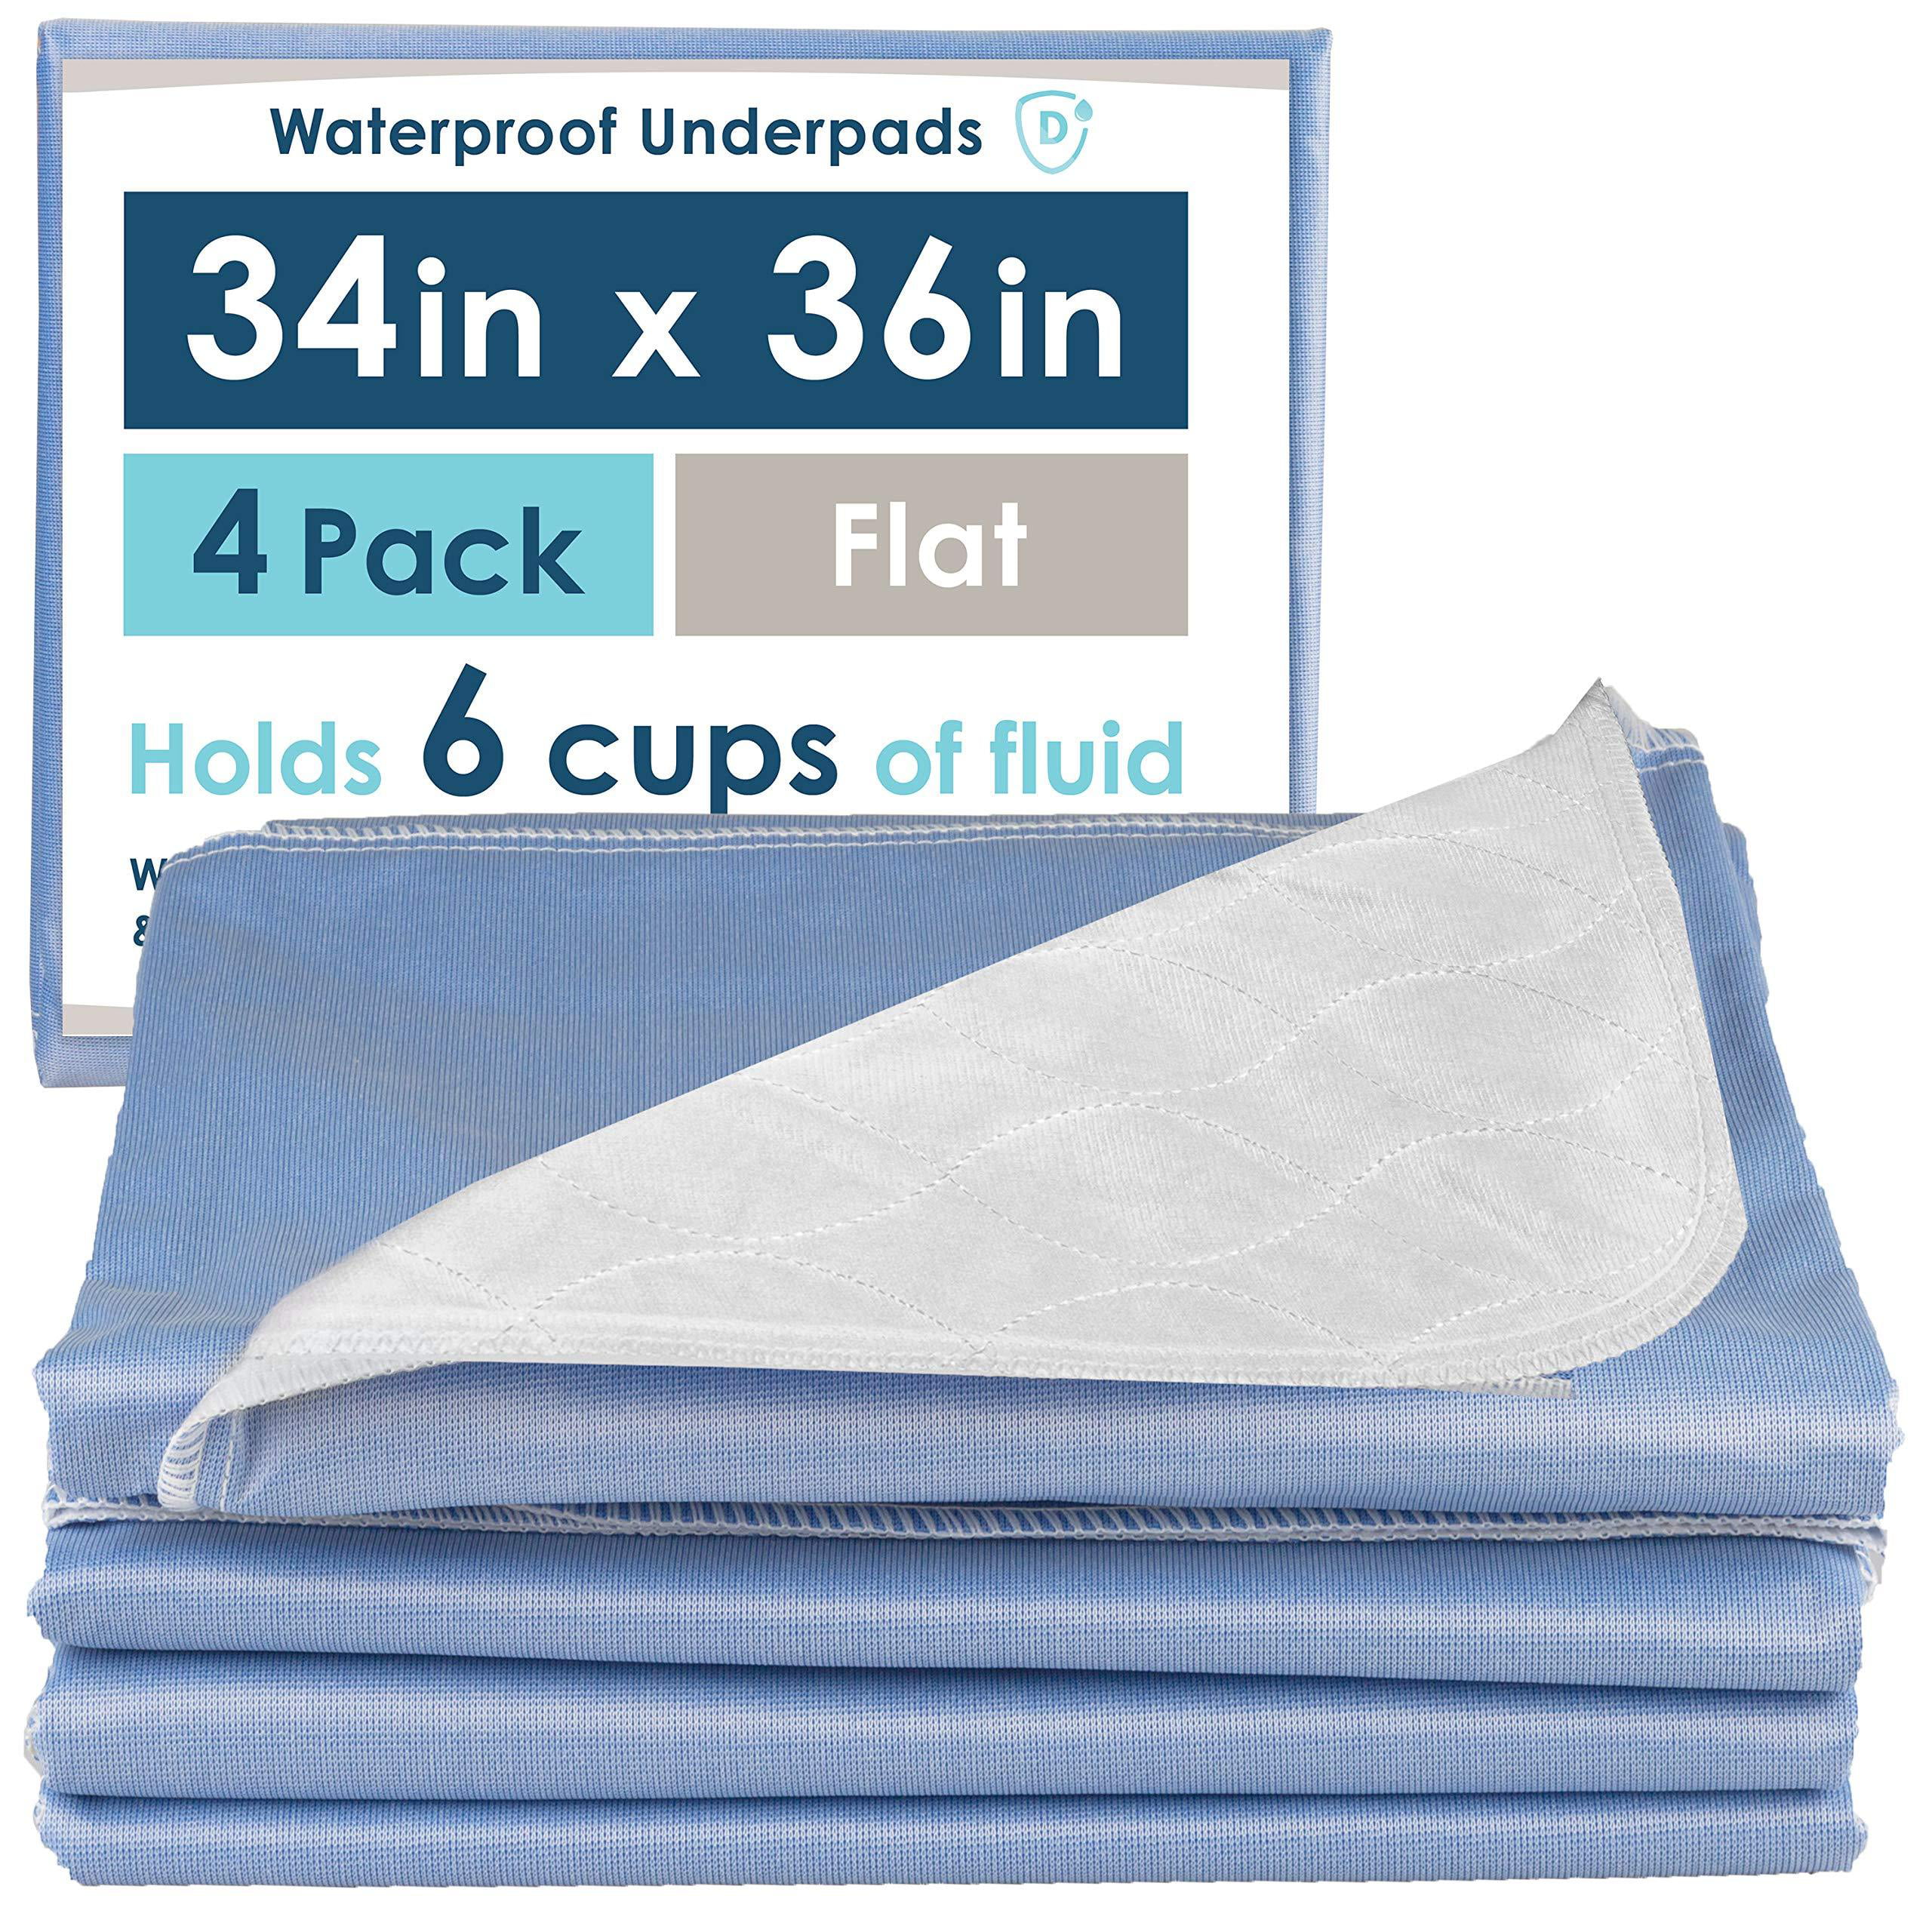 Dry Defender Waterproof Bed Pads for Incontinence - Absorbent Washable  Underpad - Mattress Pads for Kids or Adults - Flat, 17x24 Inch (Pack of 1)  1 Count (Pack of 1) 